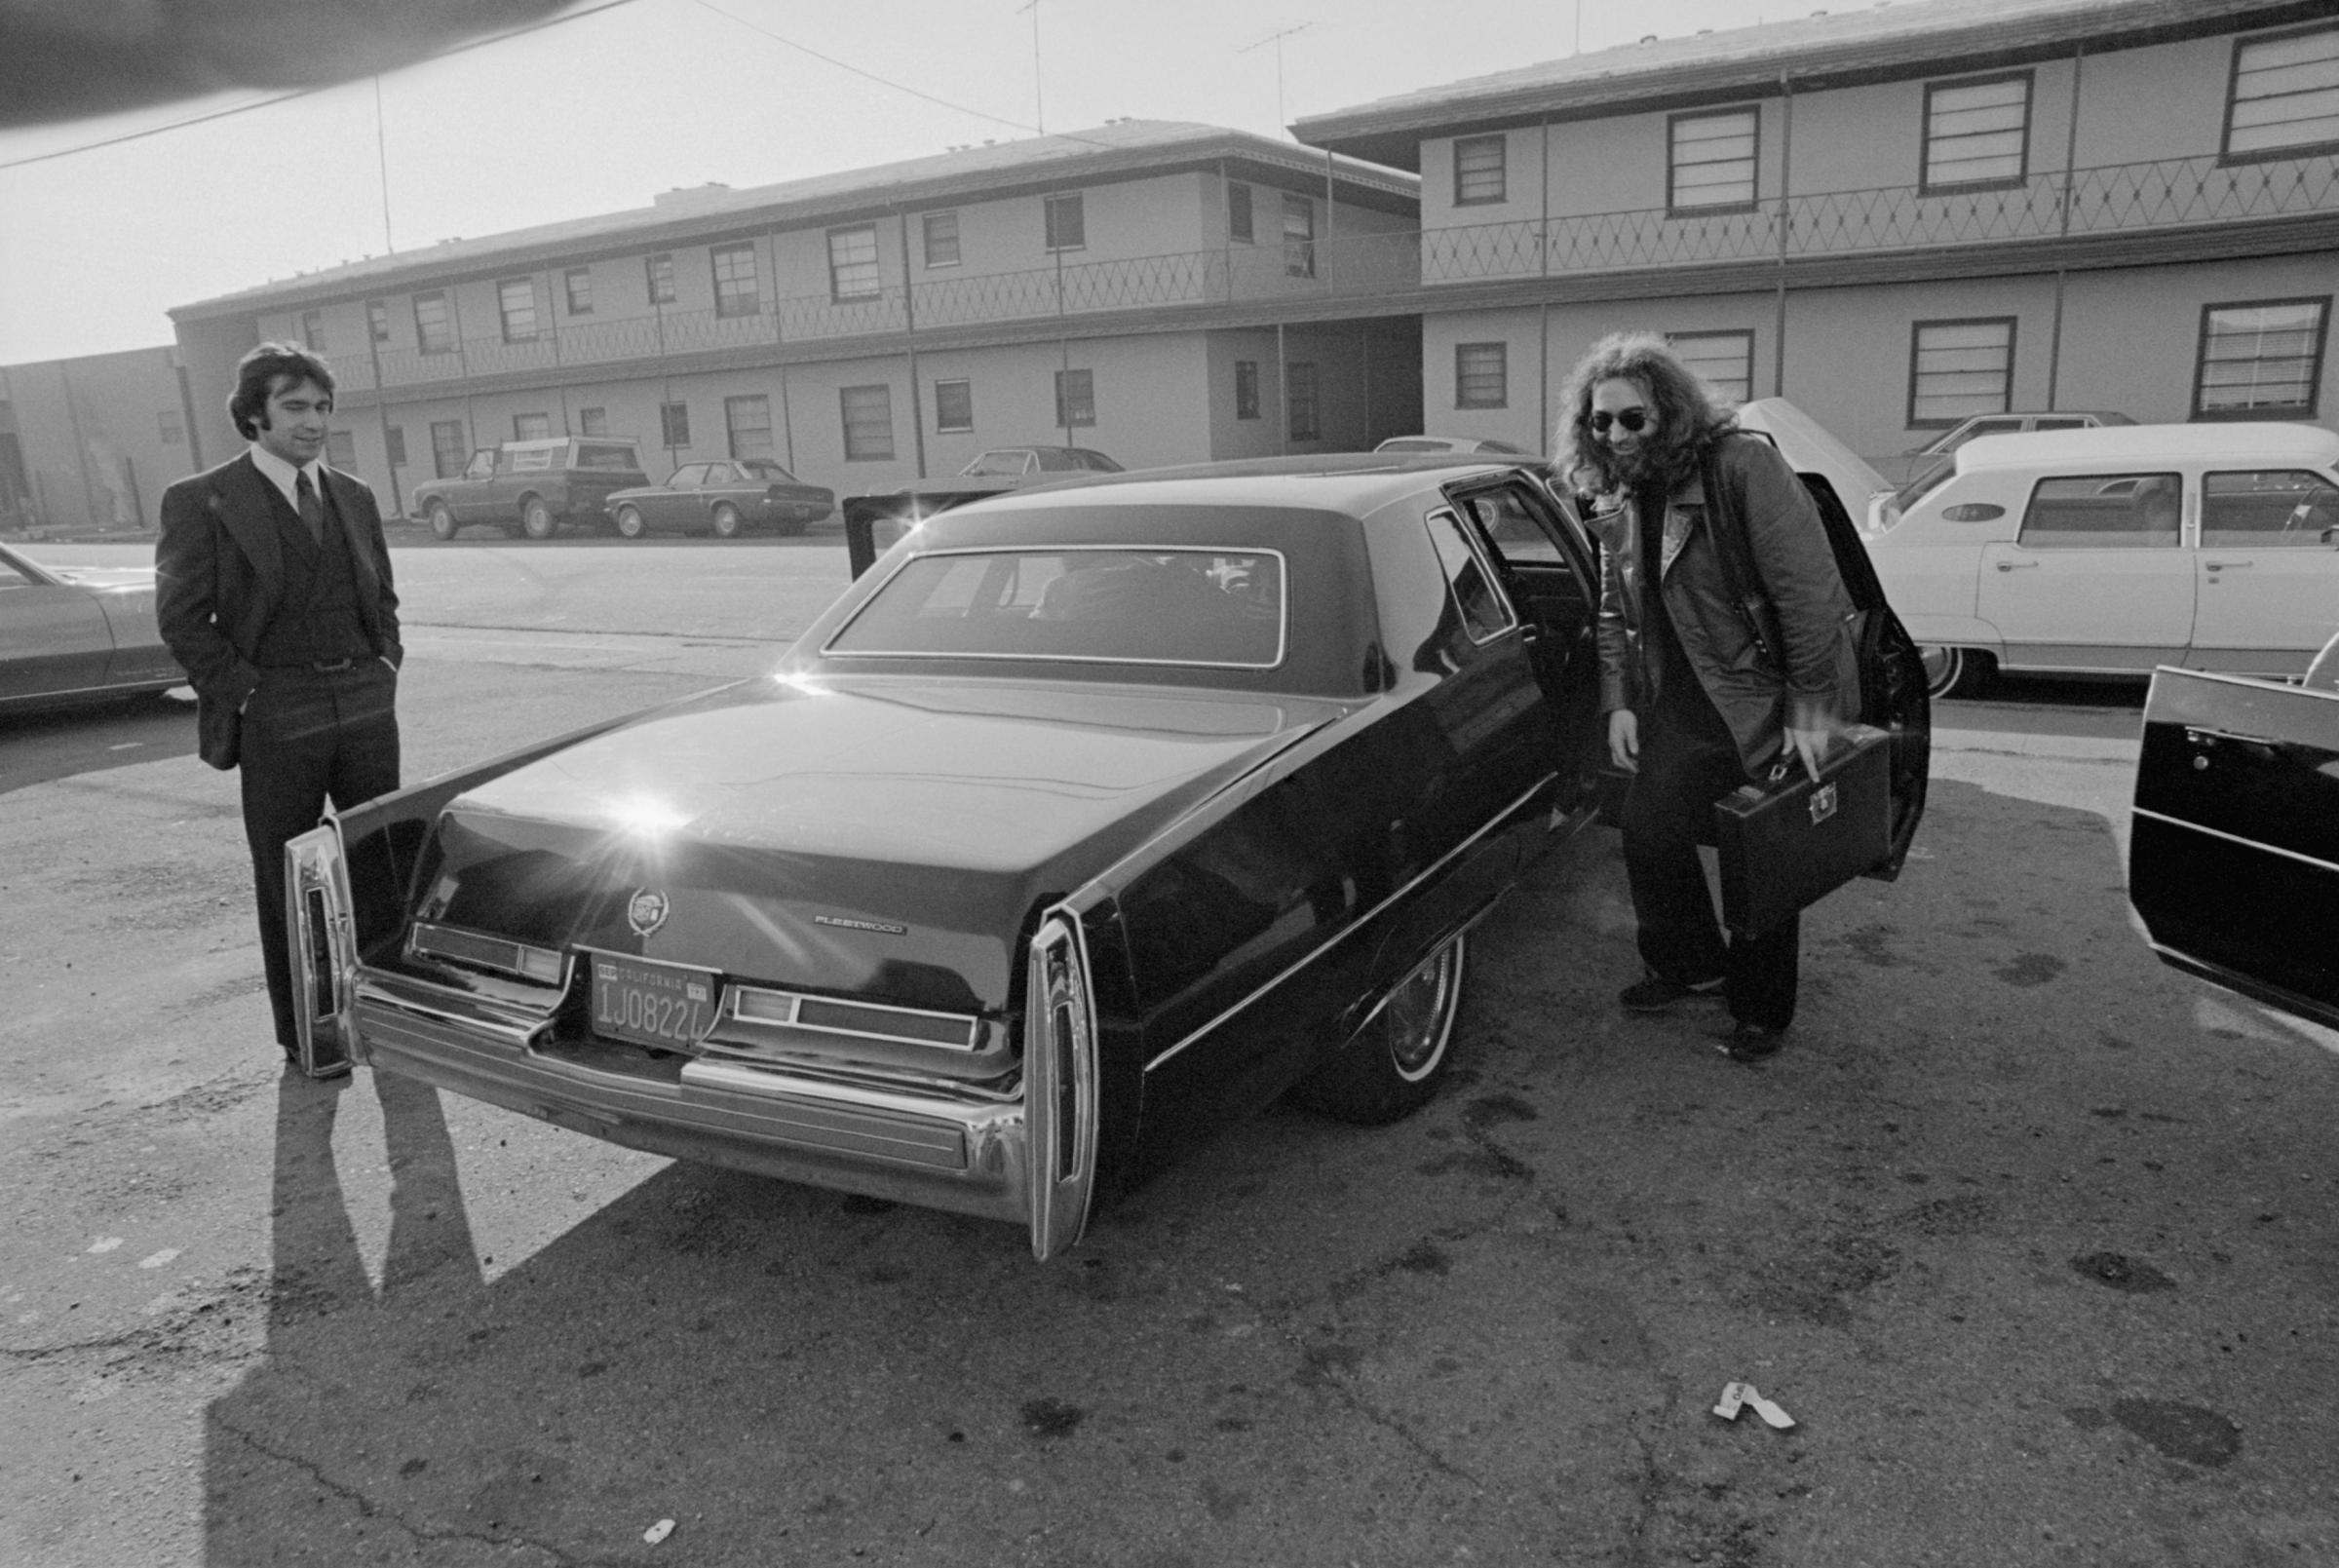 Jerry Garcia Getting into Car with Suitcase